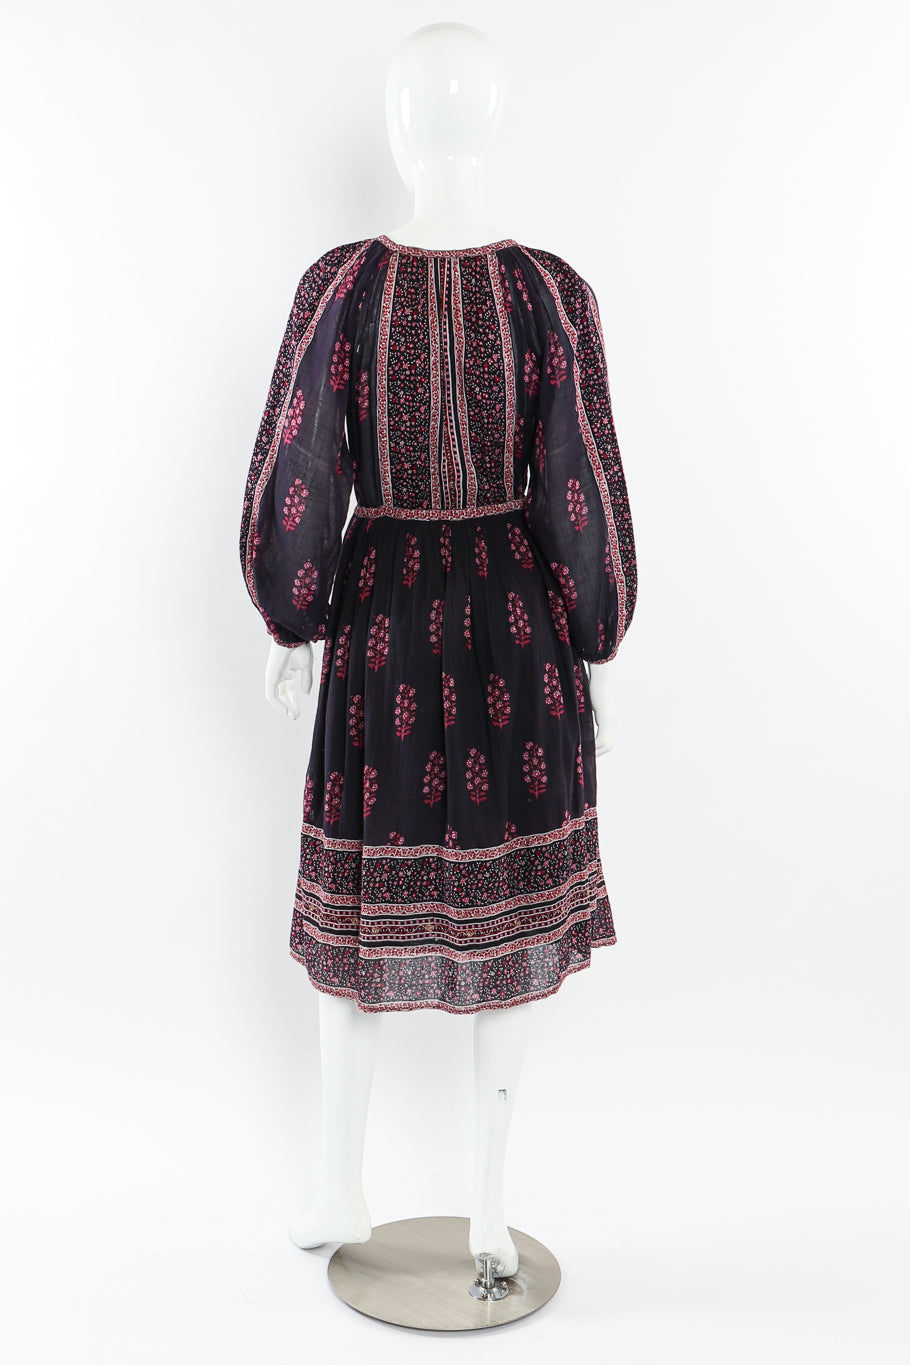 Cotton peasant dress by Mayur on mannequin back @recessla